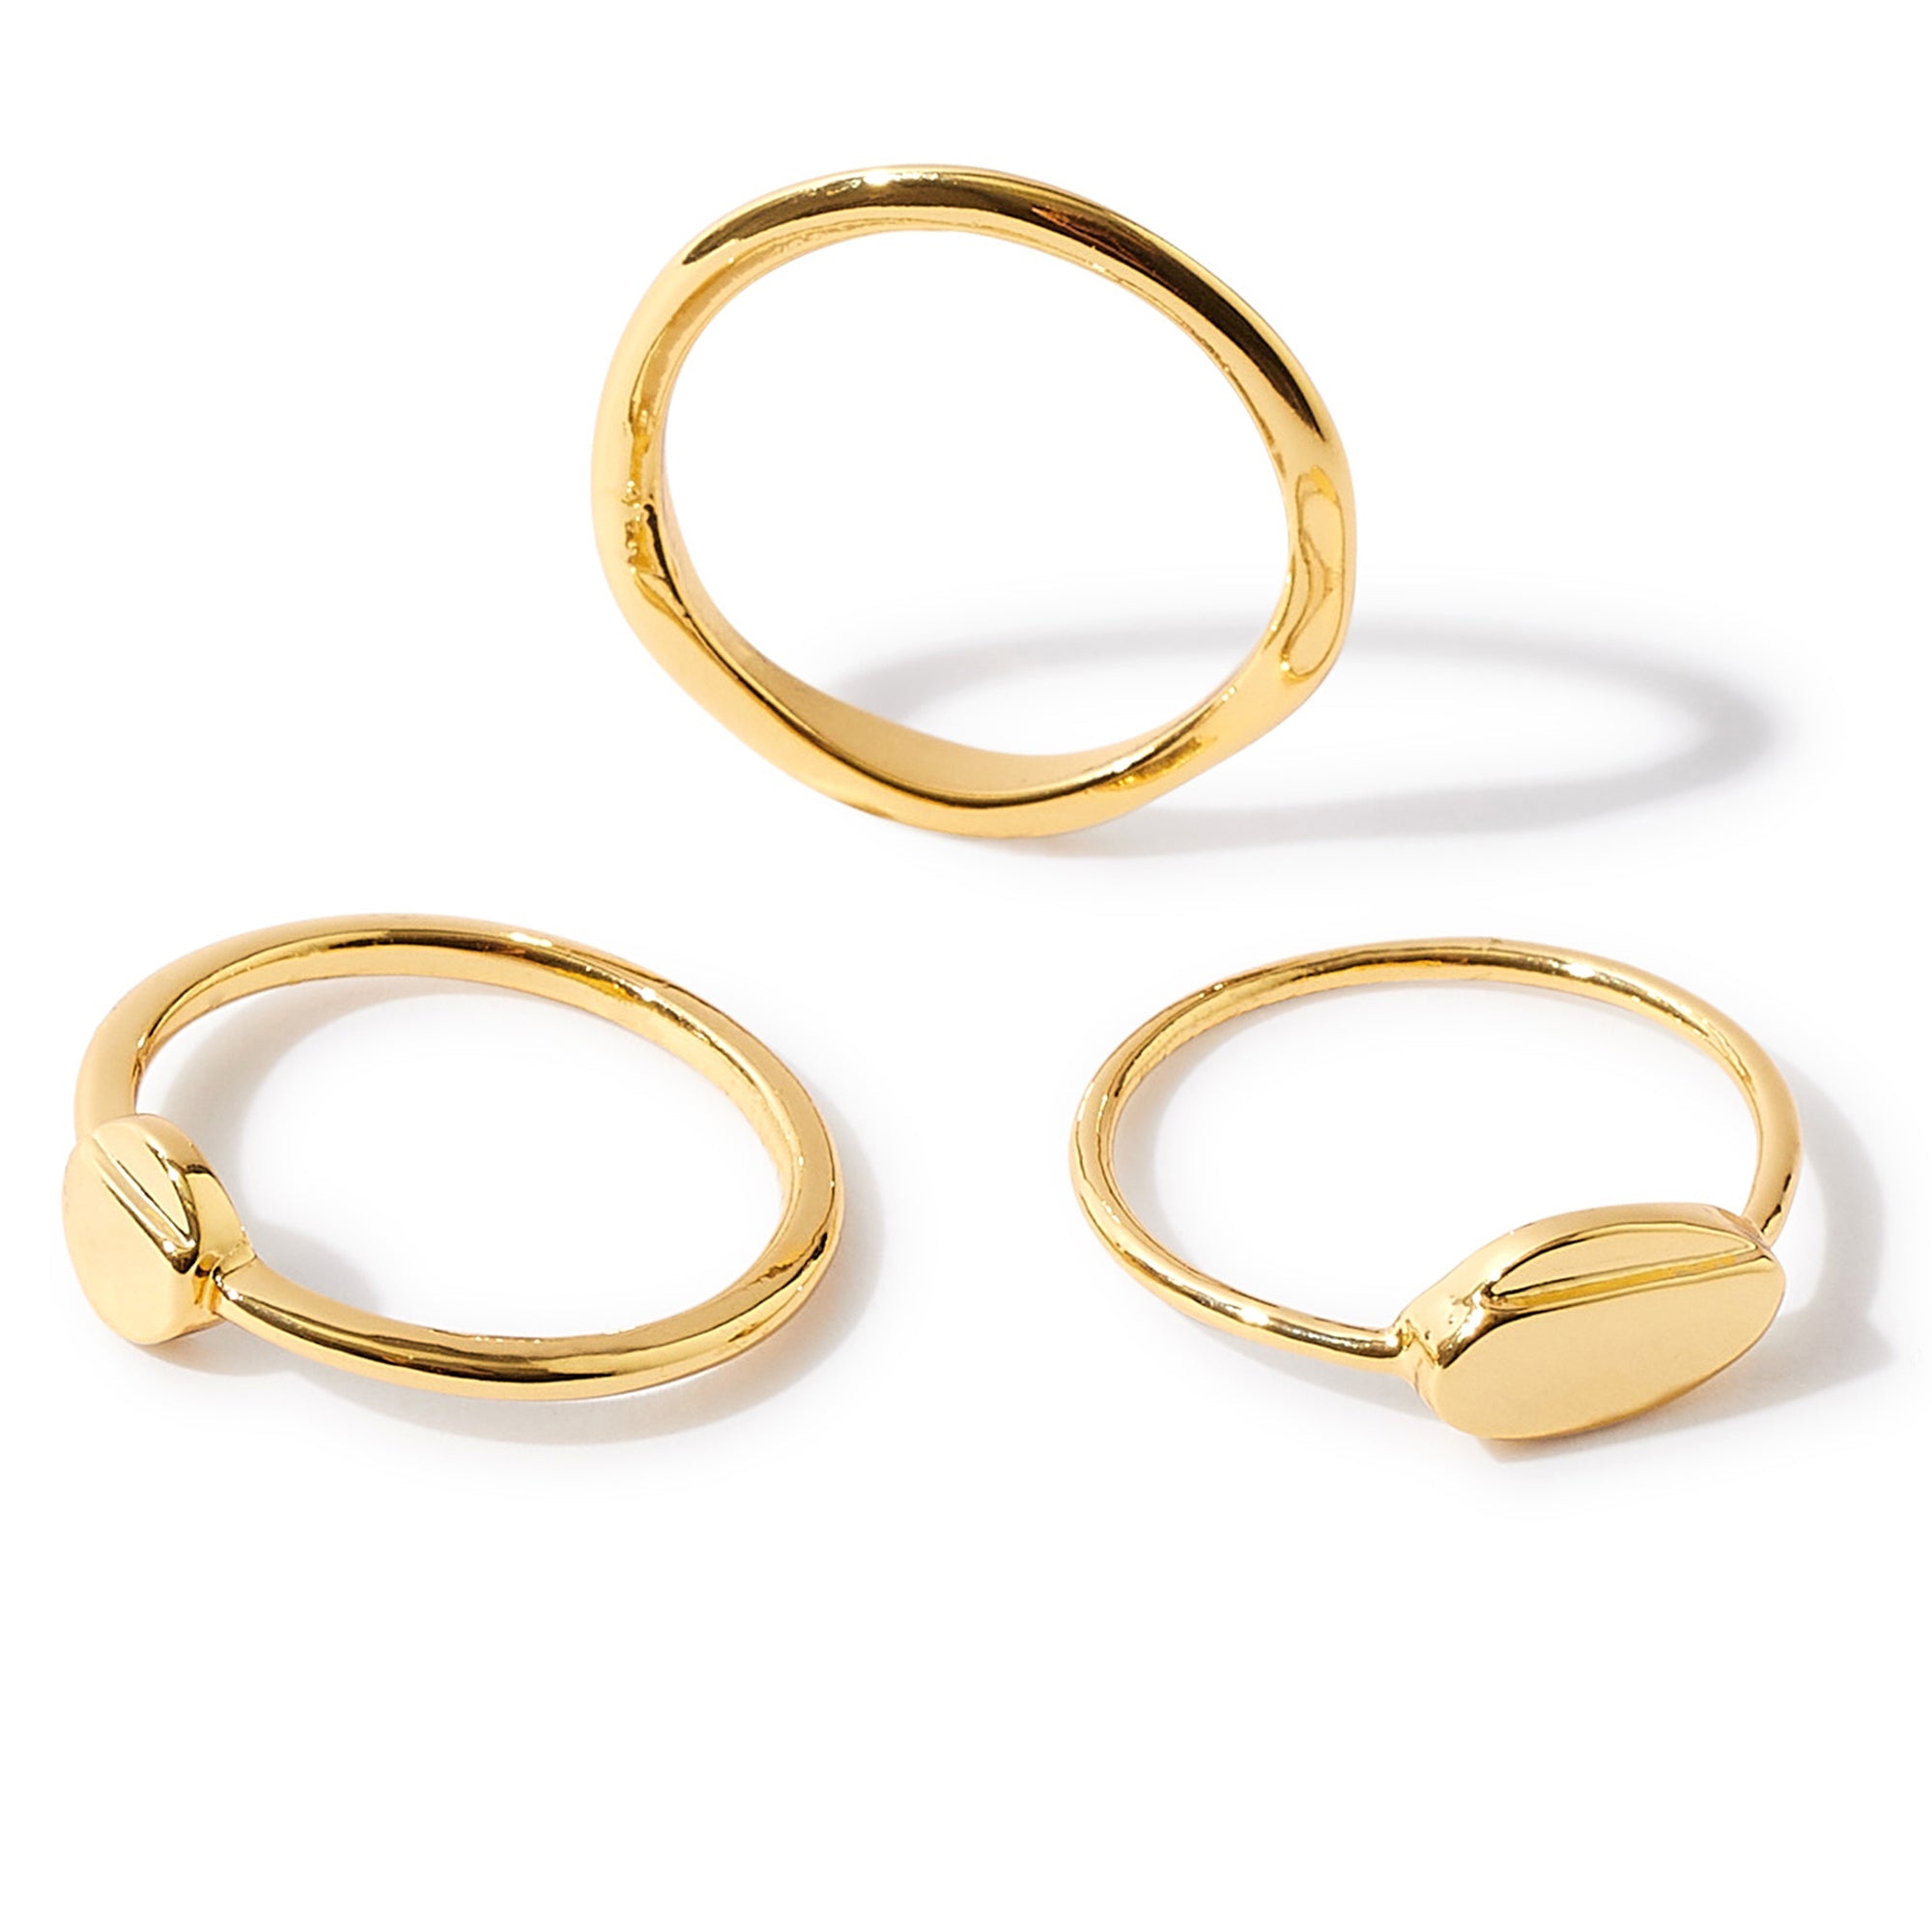 Real Gold Plated Set of 3 Signet Stacking Rings For Women By Accessorize London Small